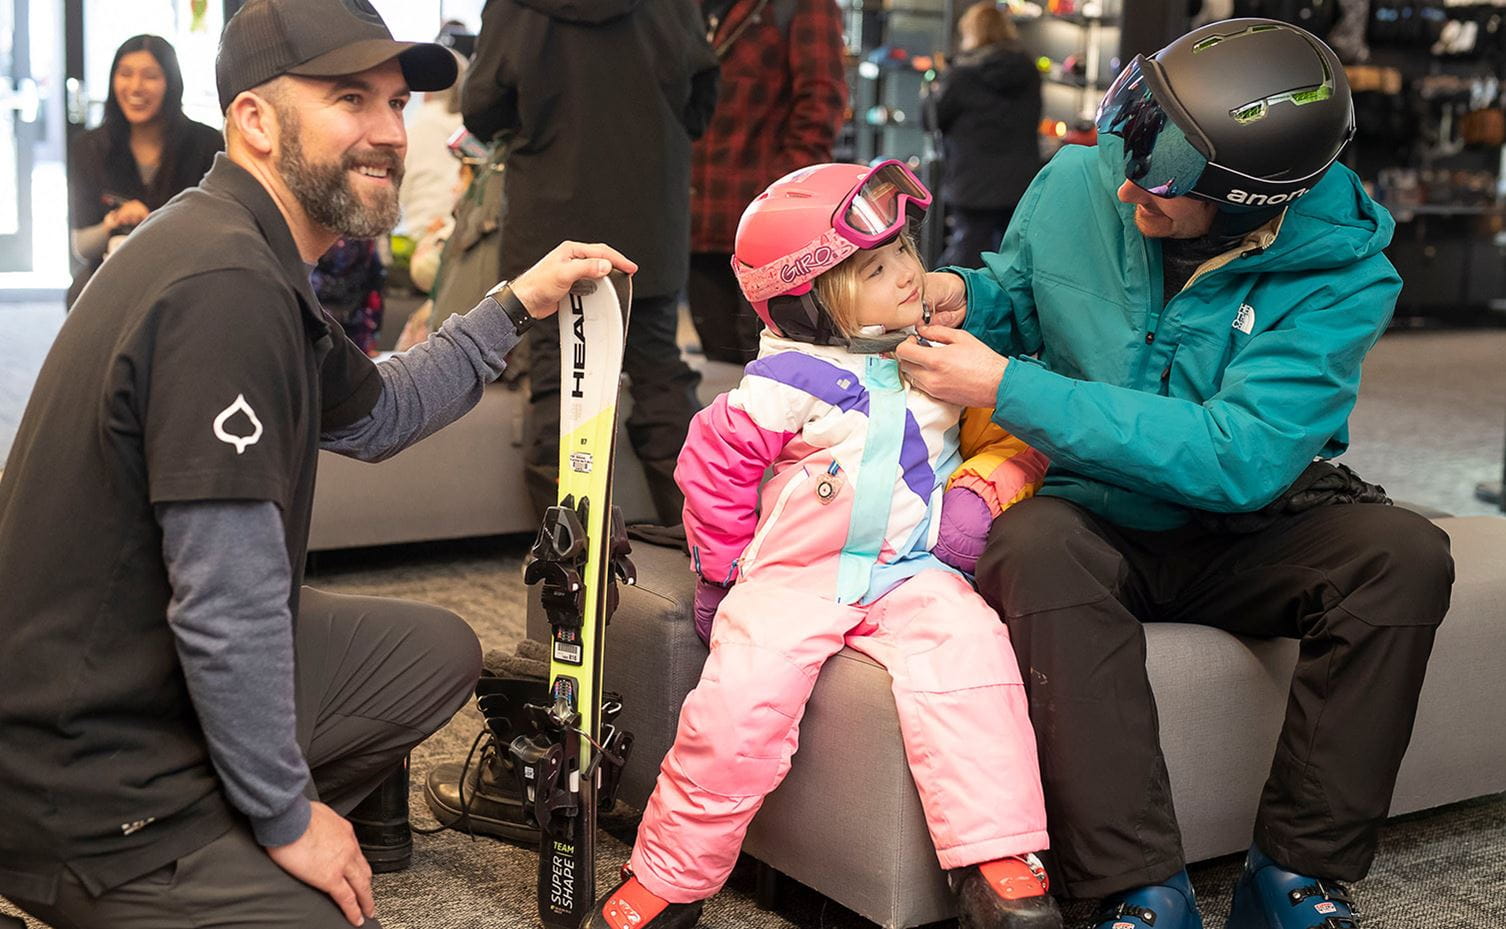 A young child gets ski rentals at Four Mountain Sports